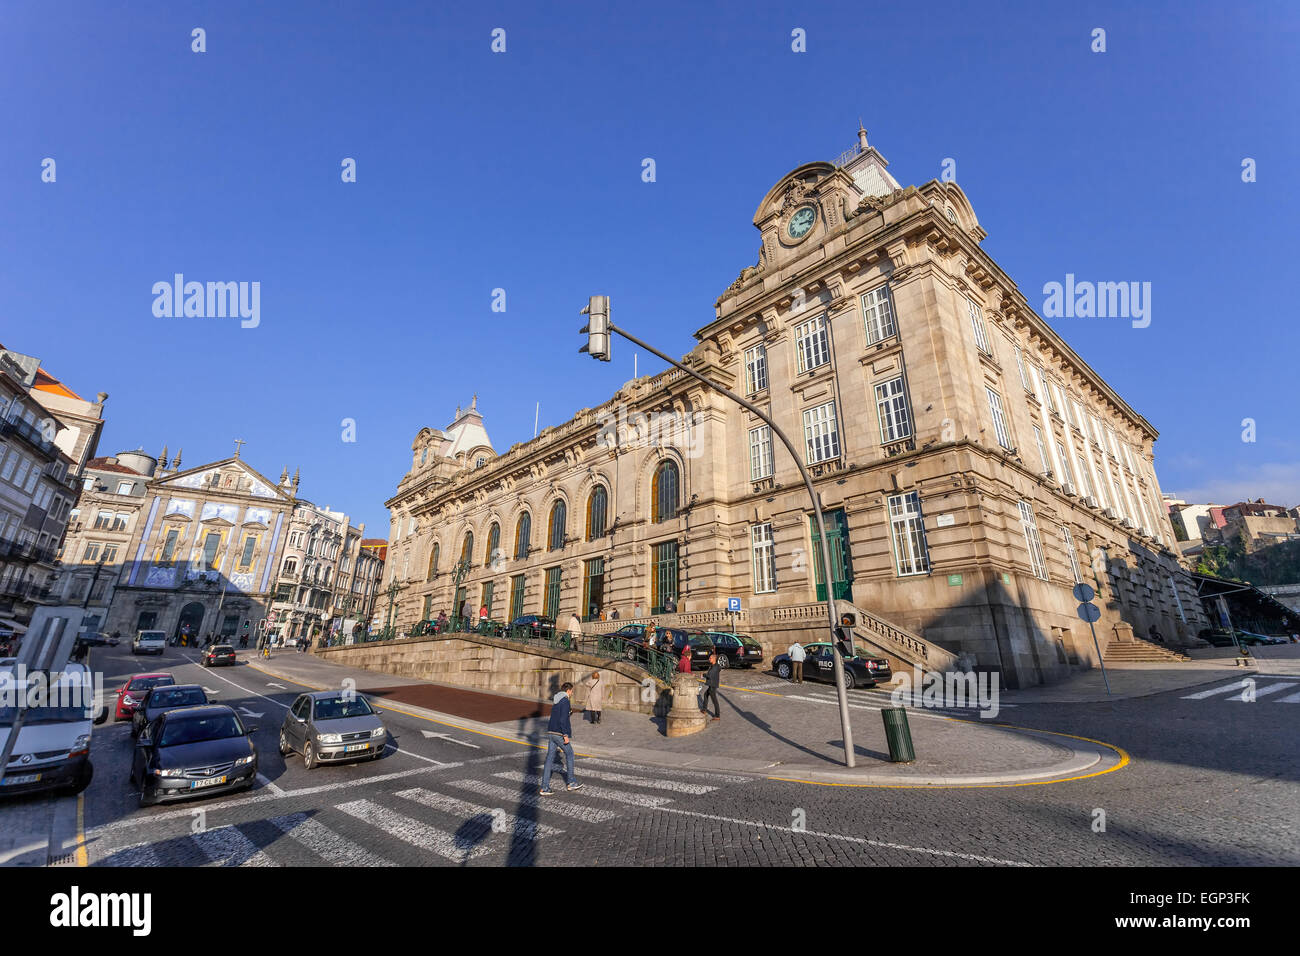 Porto, Portugal. View of the Almeida Garret Square with the Sao Bento railway station and Congregados Church at the back. Stock Photo